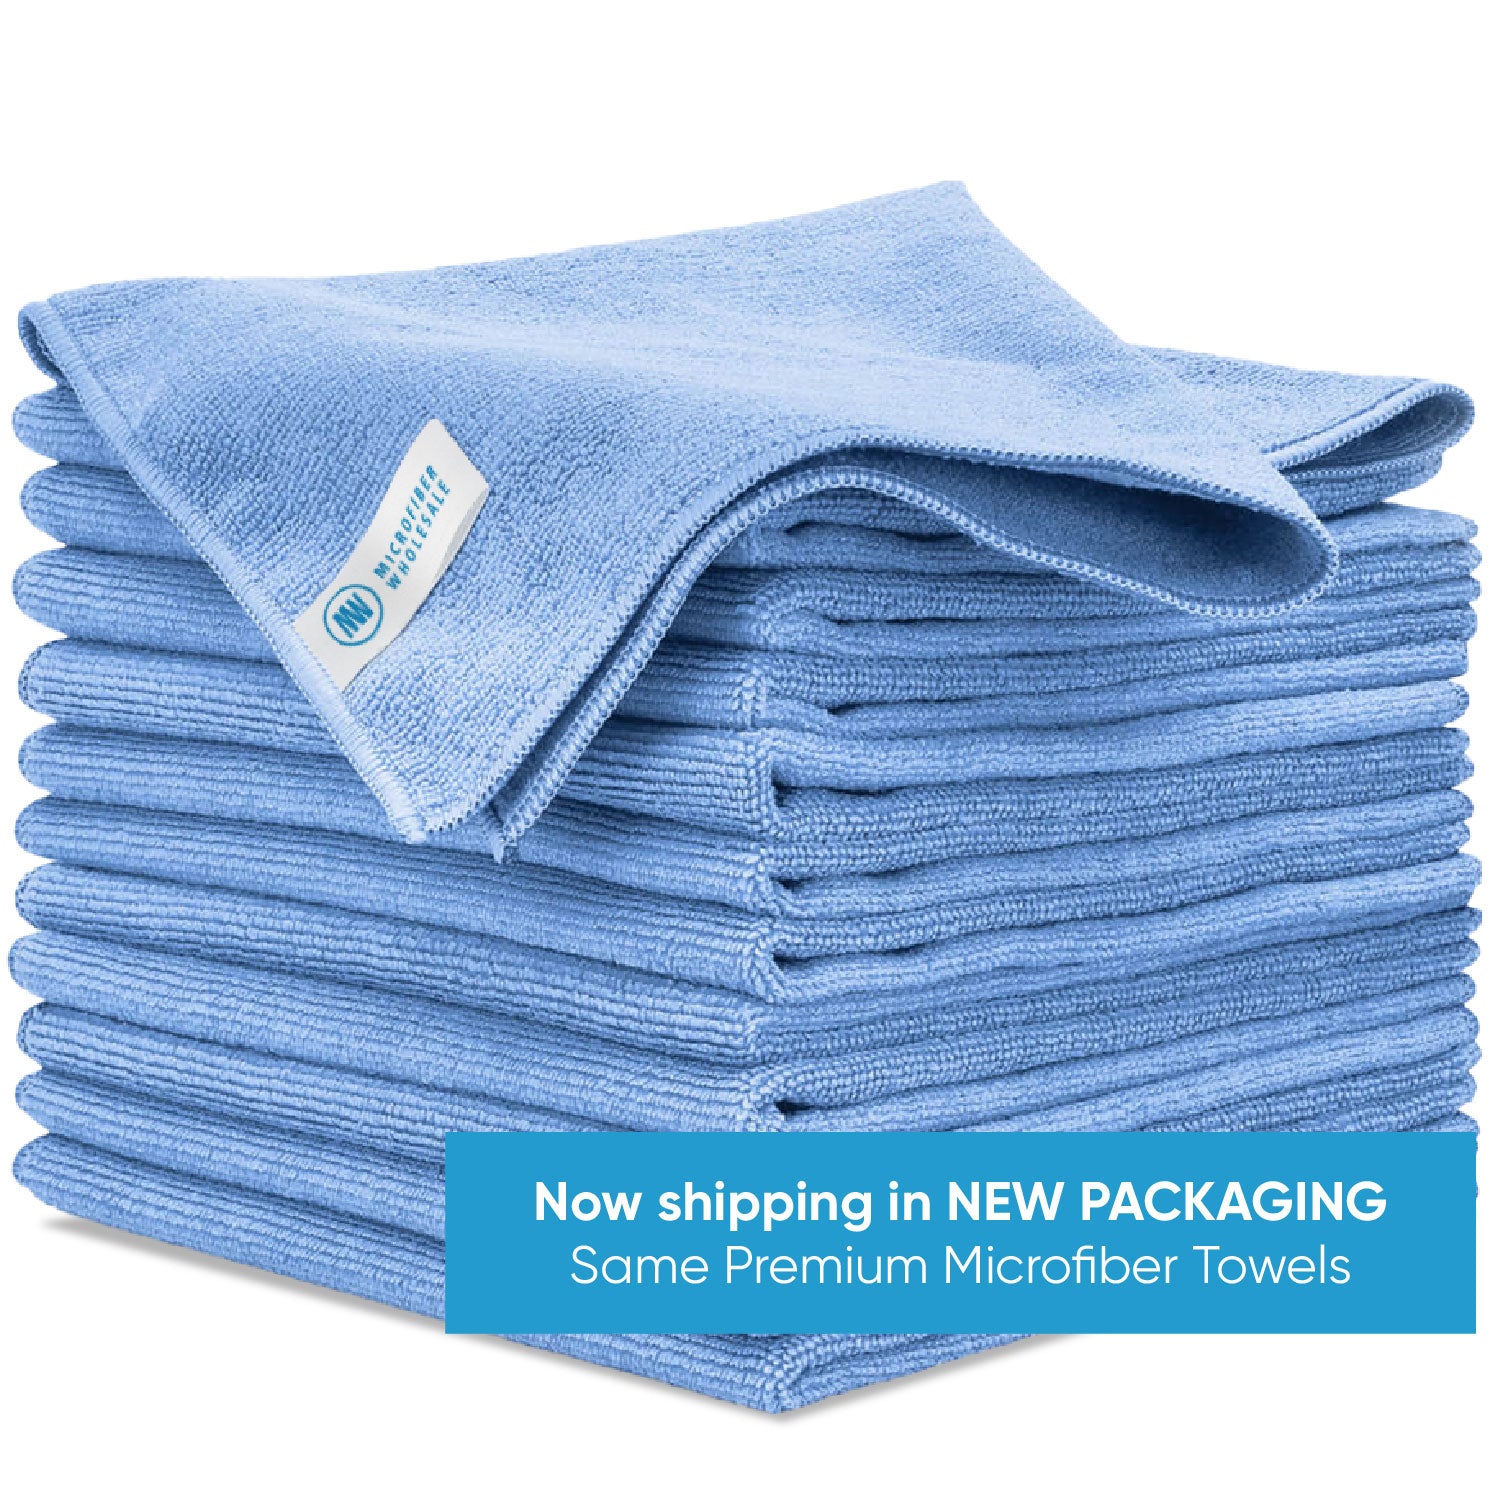 Microfiber Wholesale 16 x 16 MW Pro Multi Surface Microfiber Towels (Blue, Green, Red, Yellow)